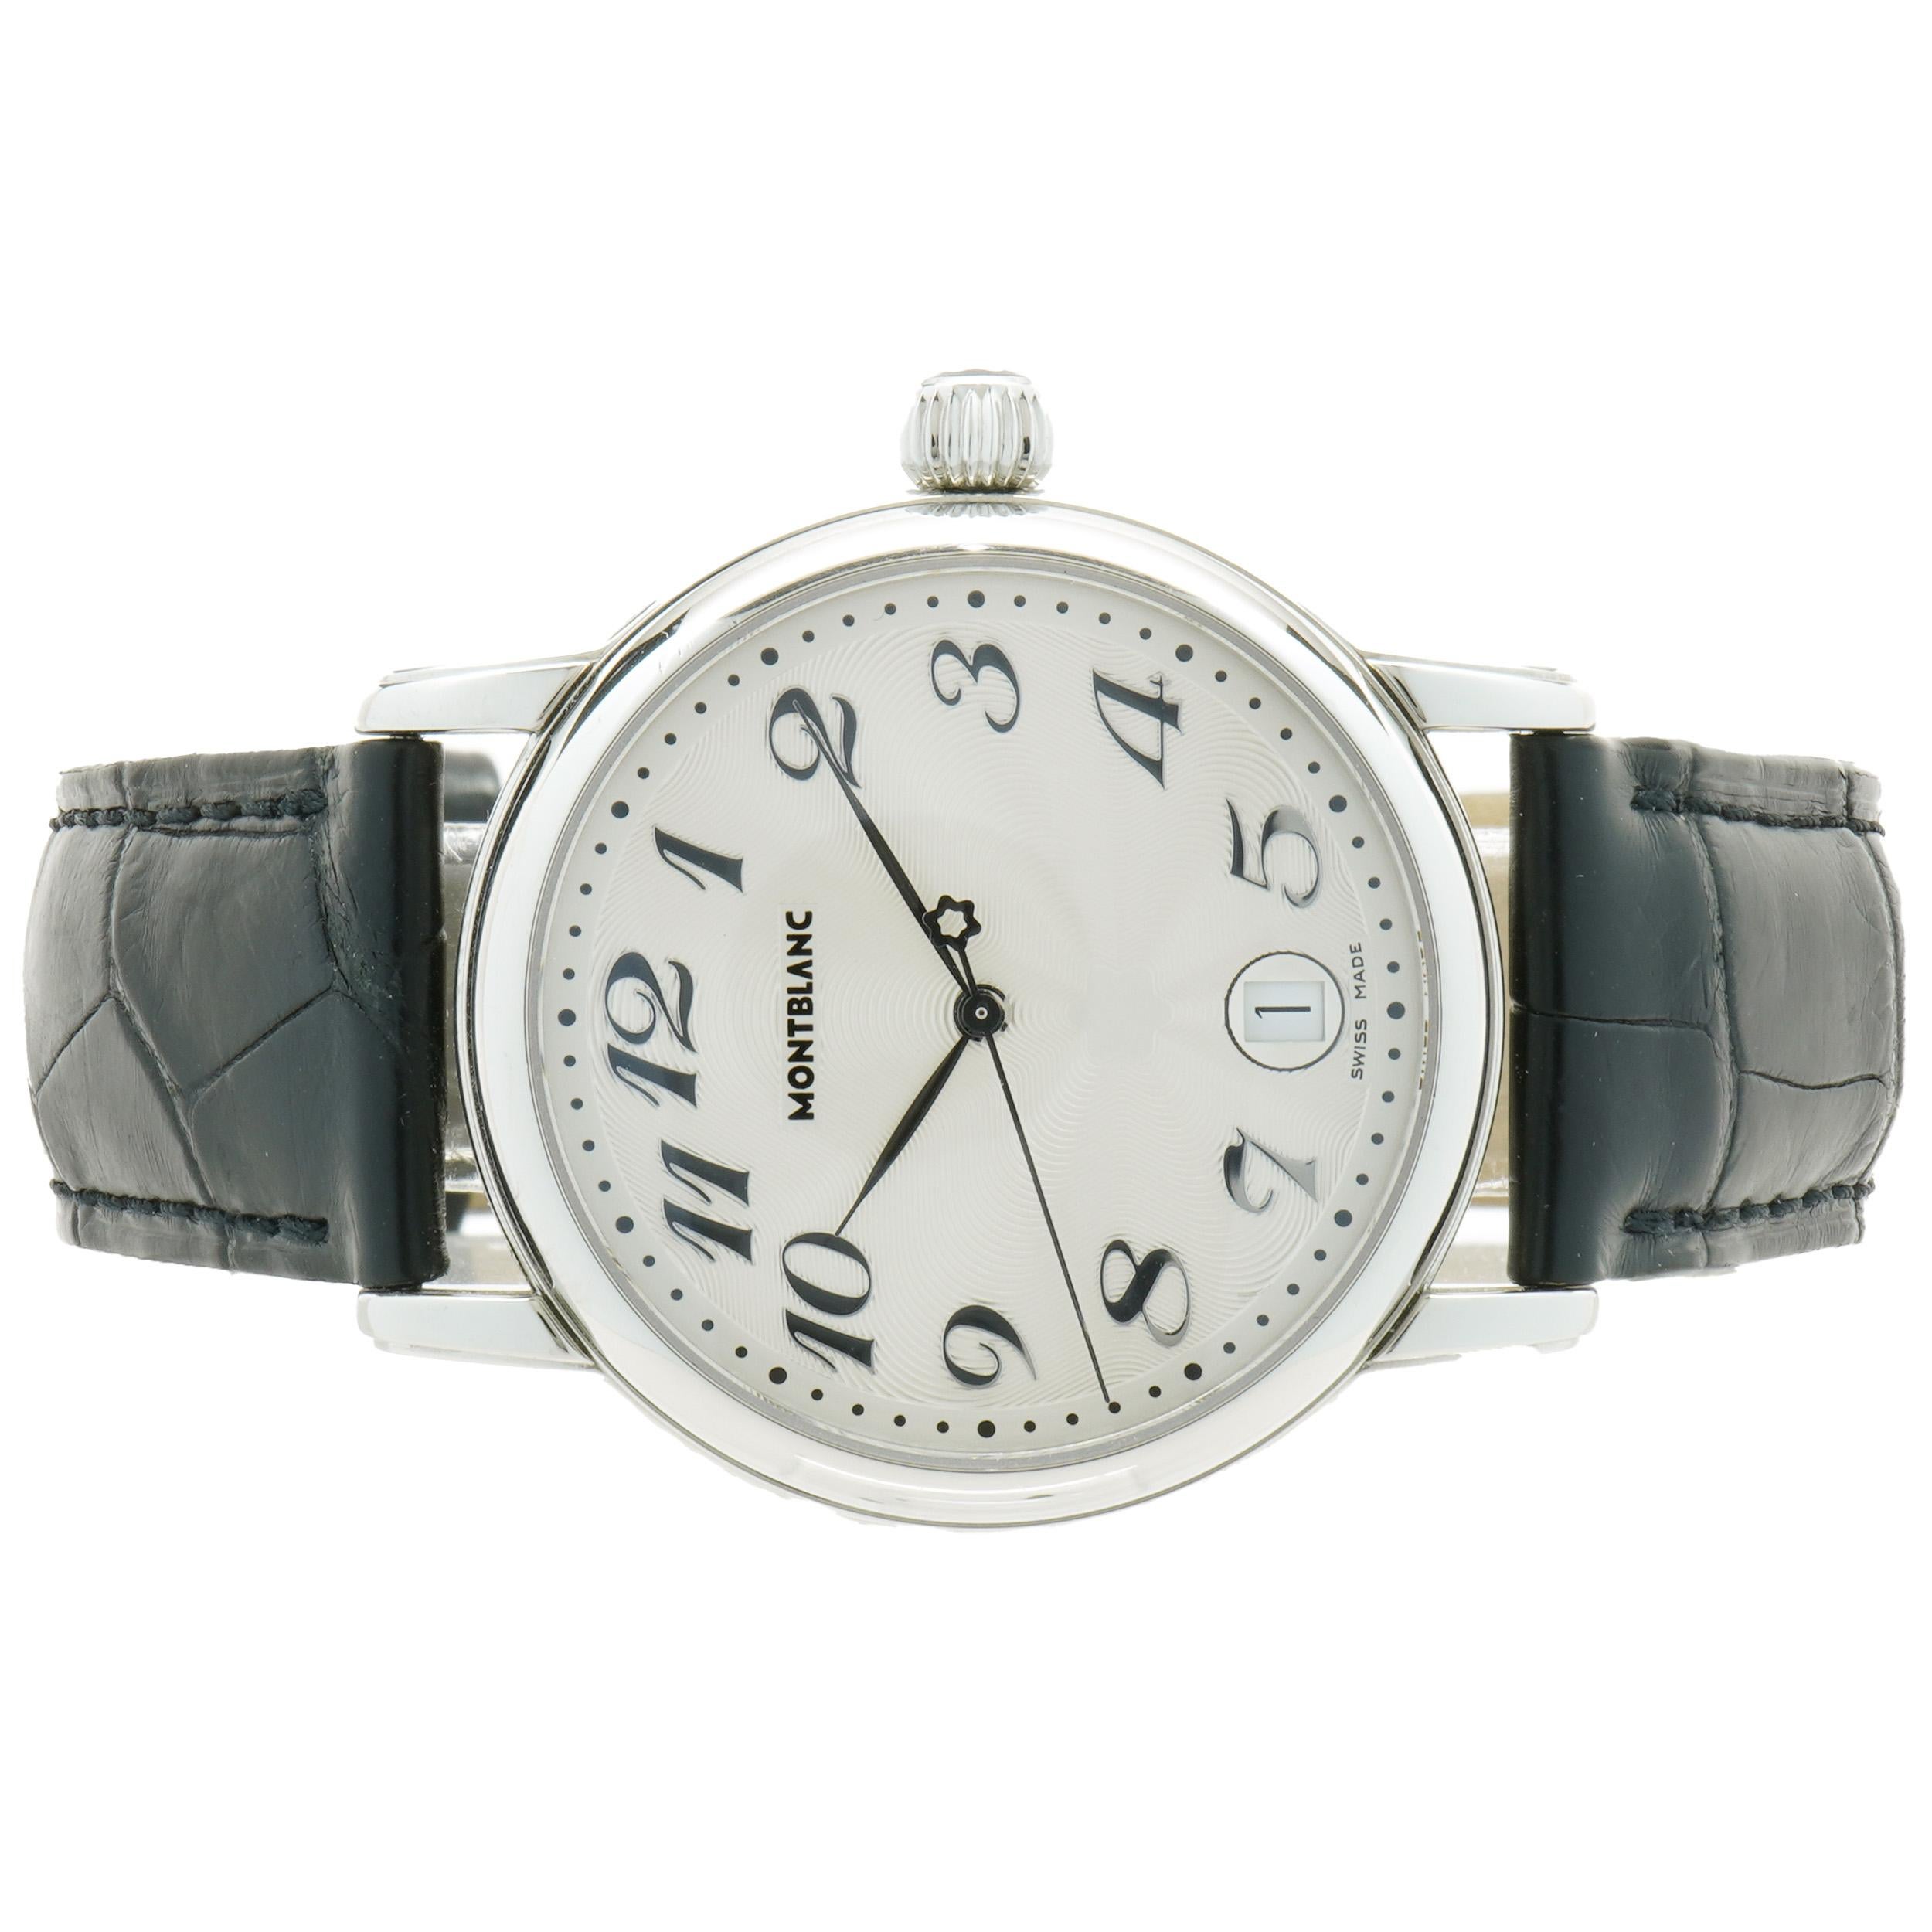 Movement: quartz
Function: hours, minutes, second, date
Case: 36mm round stainless steel case, sapphire protective crystal, screw-down crown
Band: MontBlanc black leather strap, buckle
Dial: silver arabic
Reference #: 7042
Serial #: